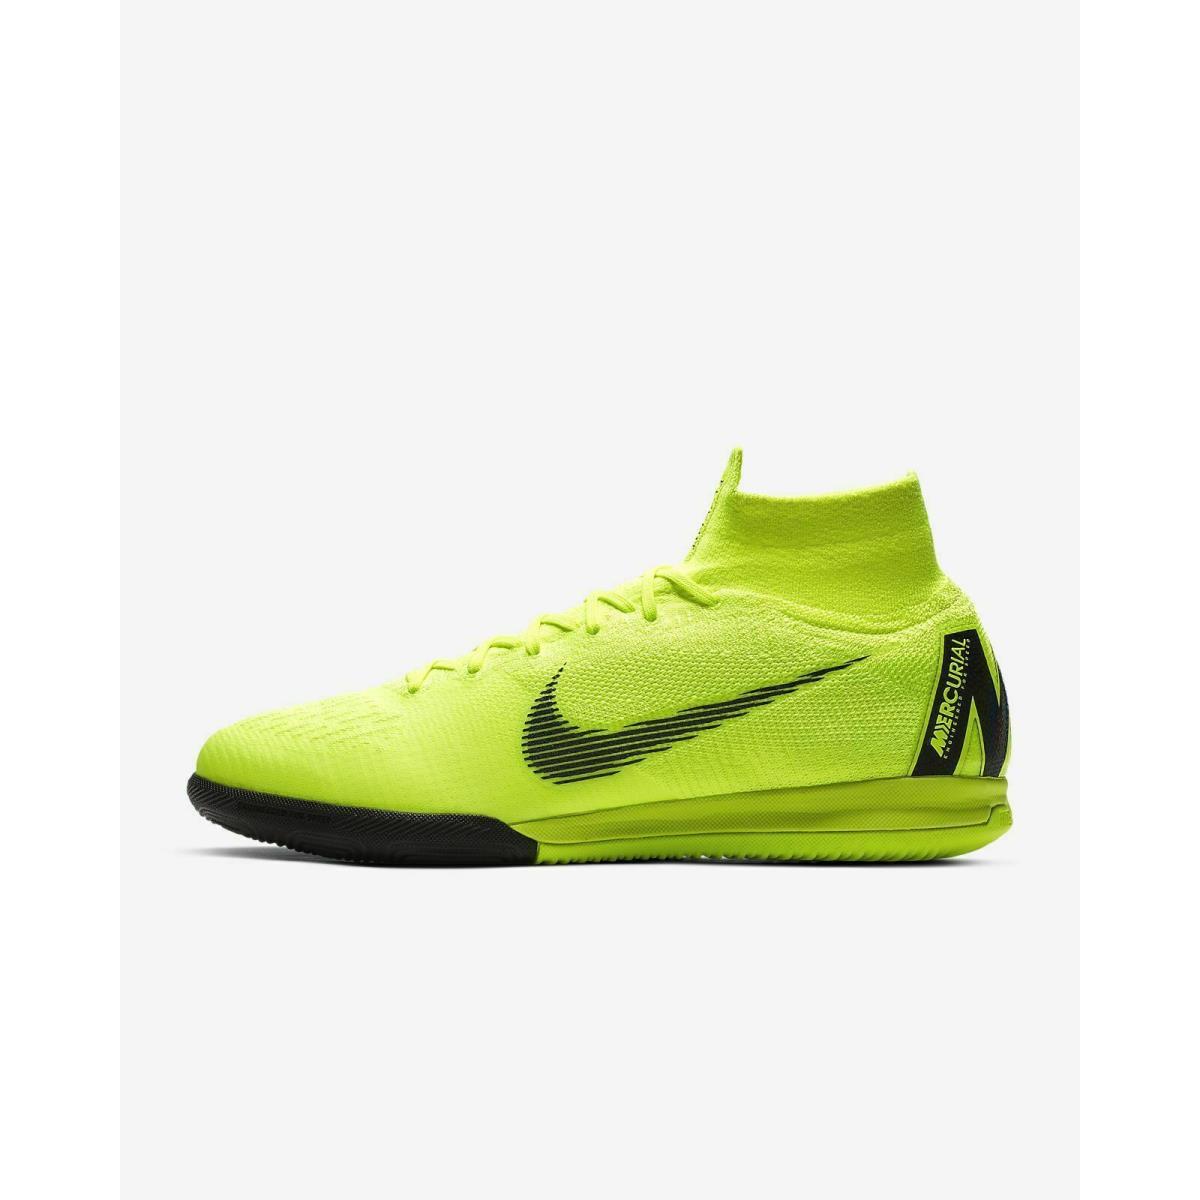 Nike Superfly 6 Elite IC Soccer Shoes Flyknit AH7373 701